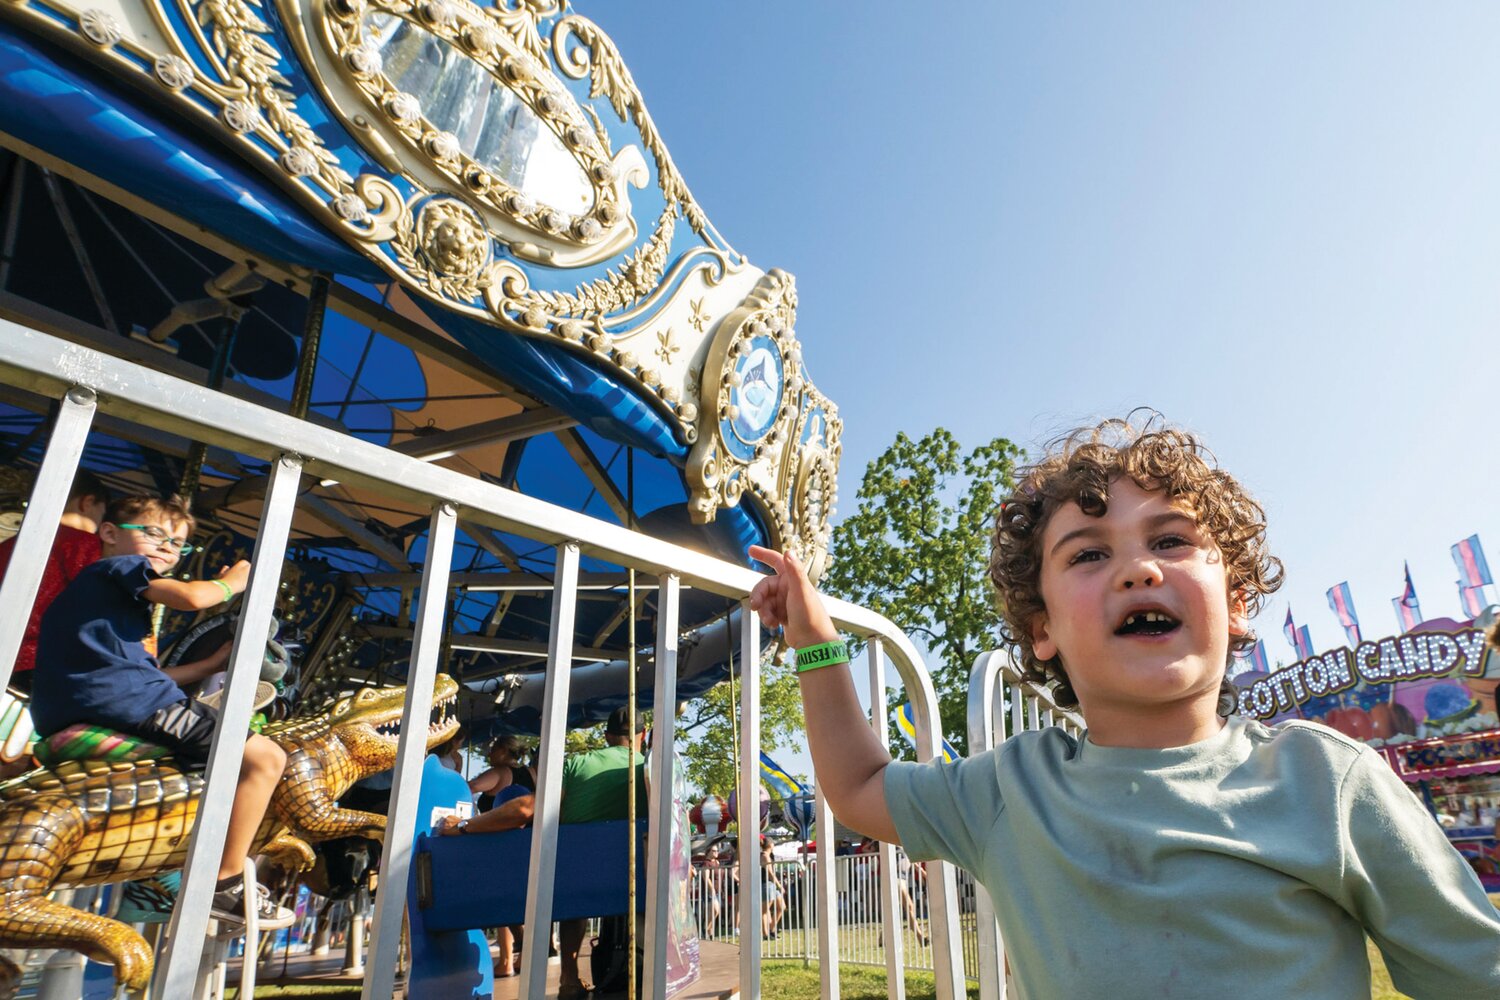 Elliot Strenger, of Doylestown, waits for a ride on the carousel during the 57th Annual Polish American Family Festival & Country Fair 2023 Sunday at Our Lady of Czestochowa.